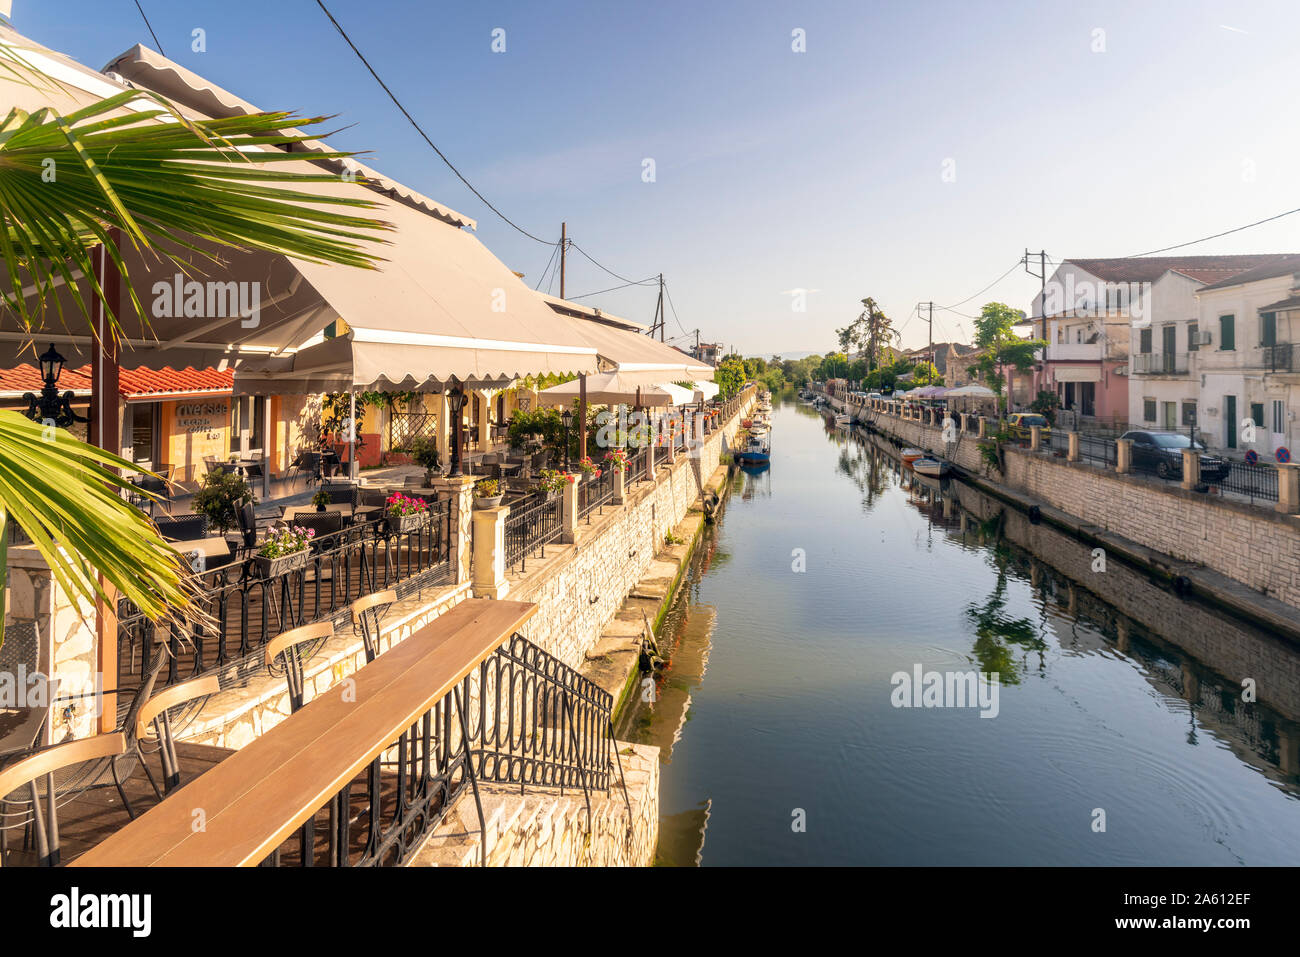 Canal amidst residential buildings against sky in Corfu, Greece Stock Photo